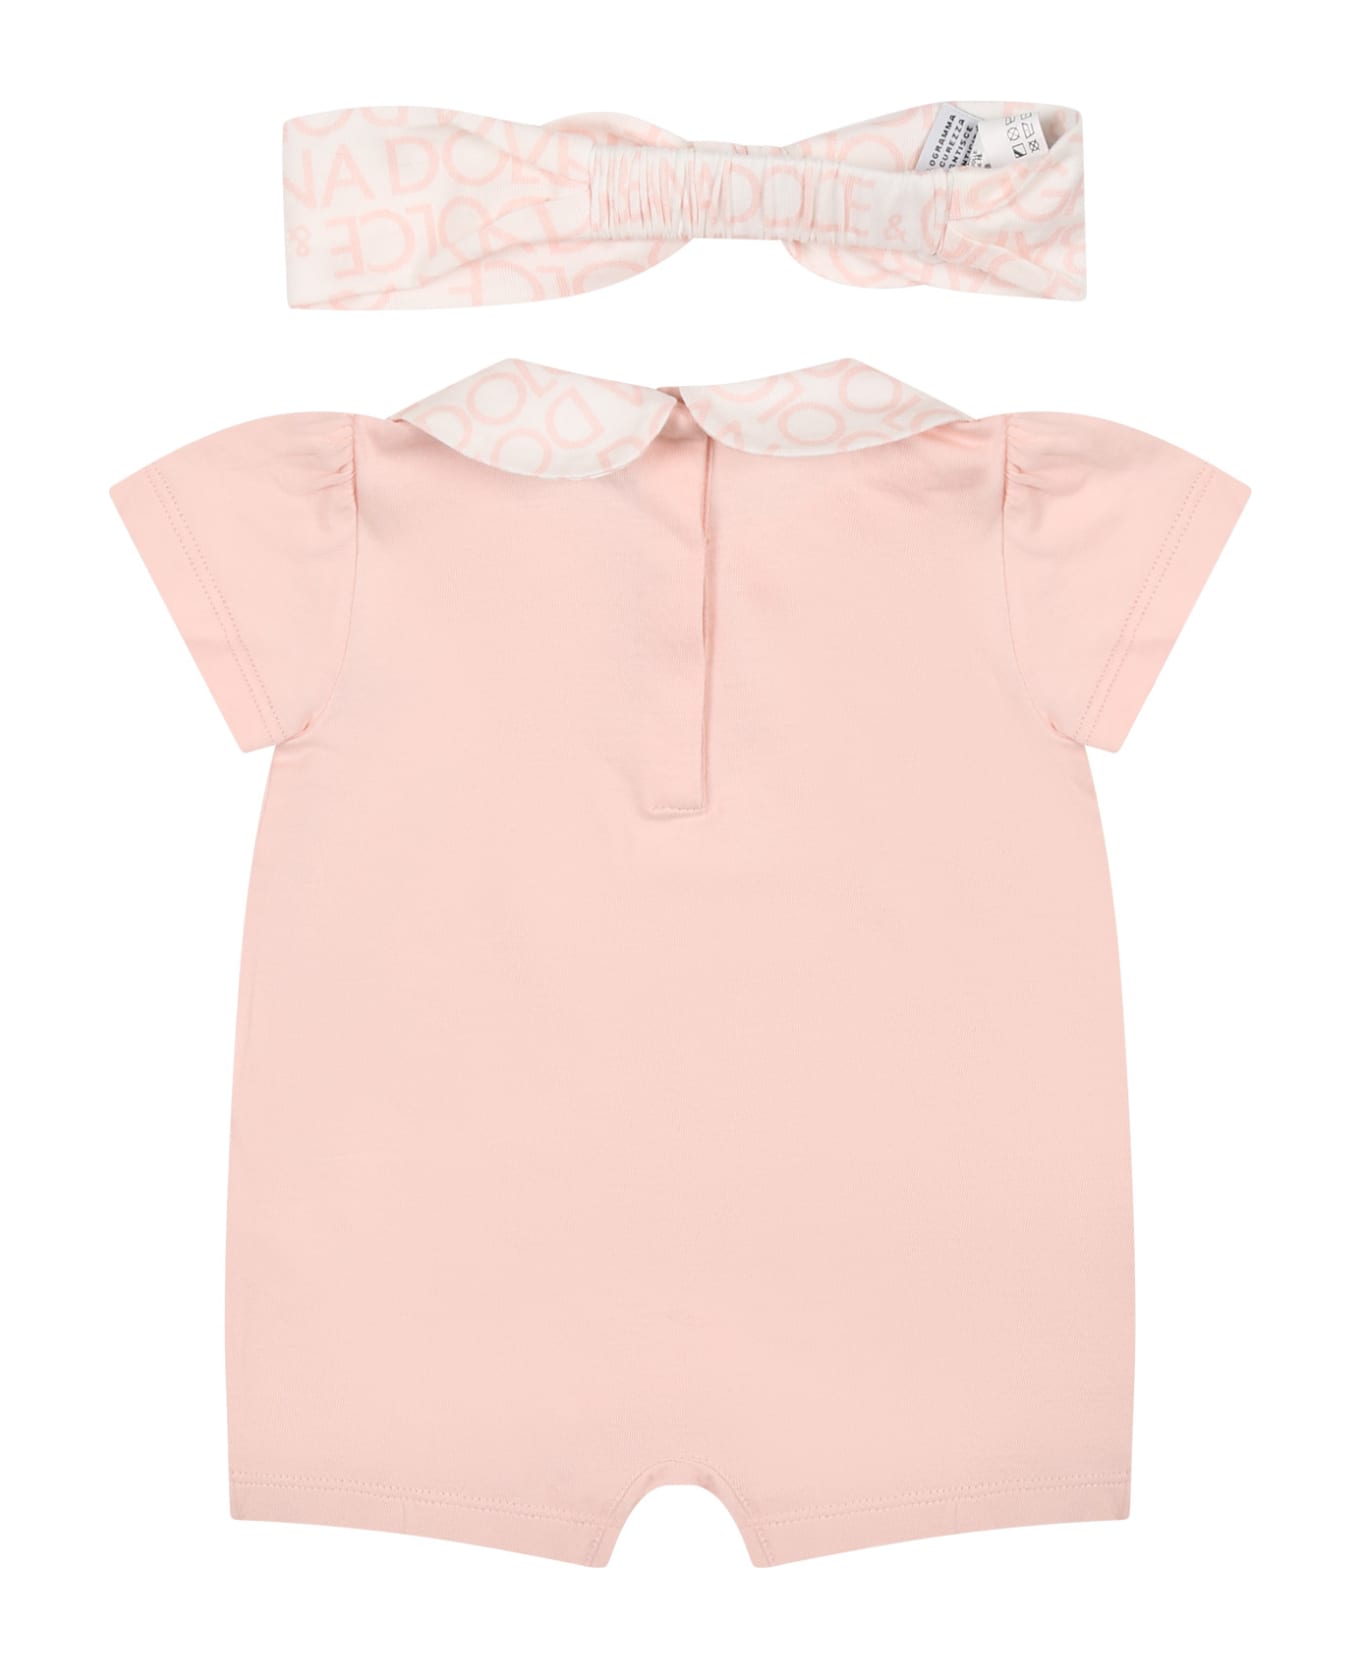 Dolce & Gabbana Pink Romper For Baby Girl With Logo - Pink